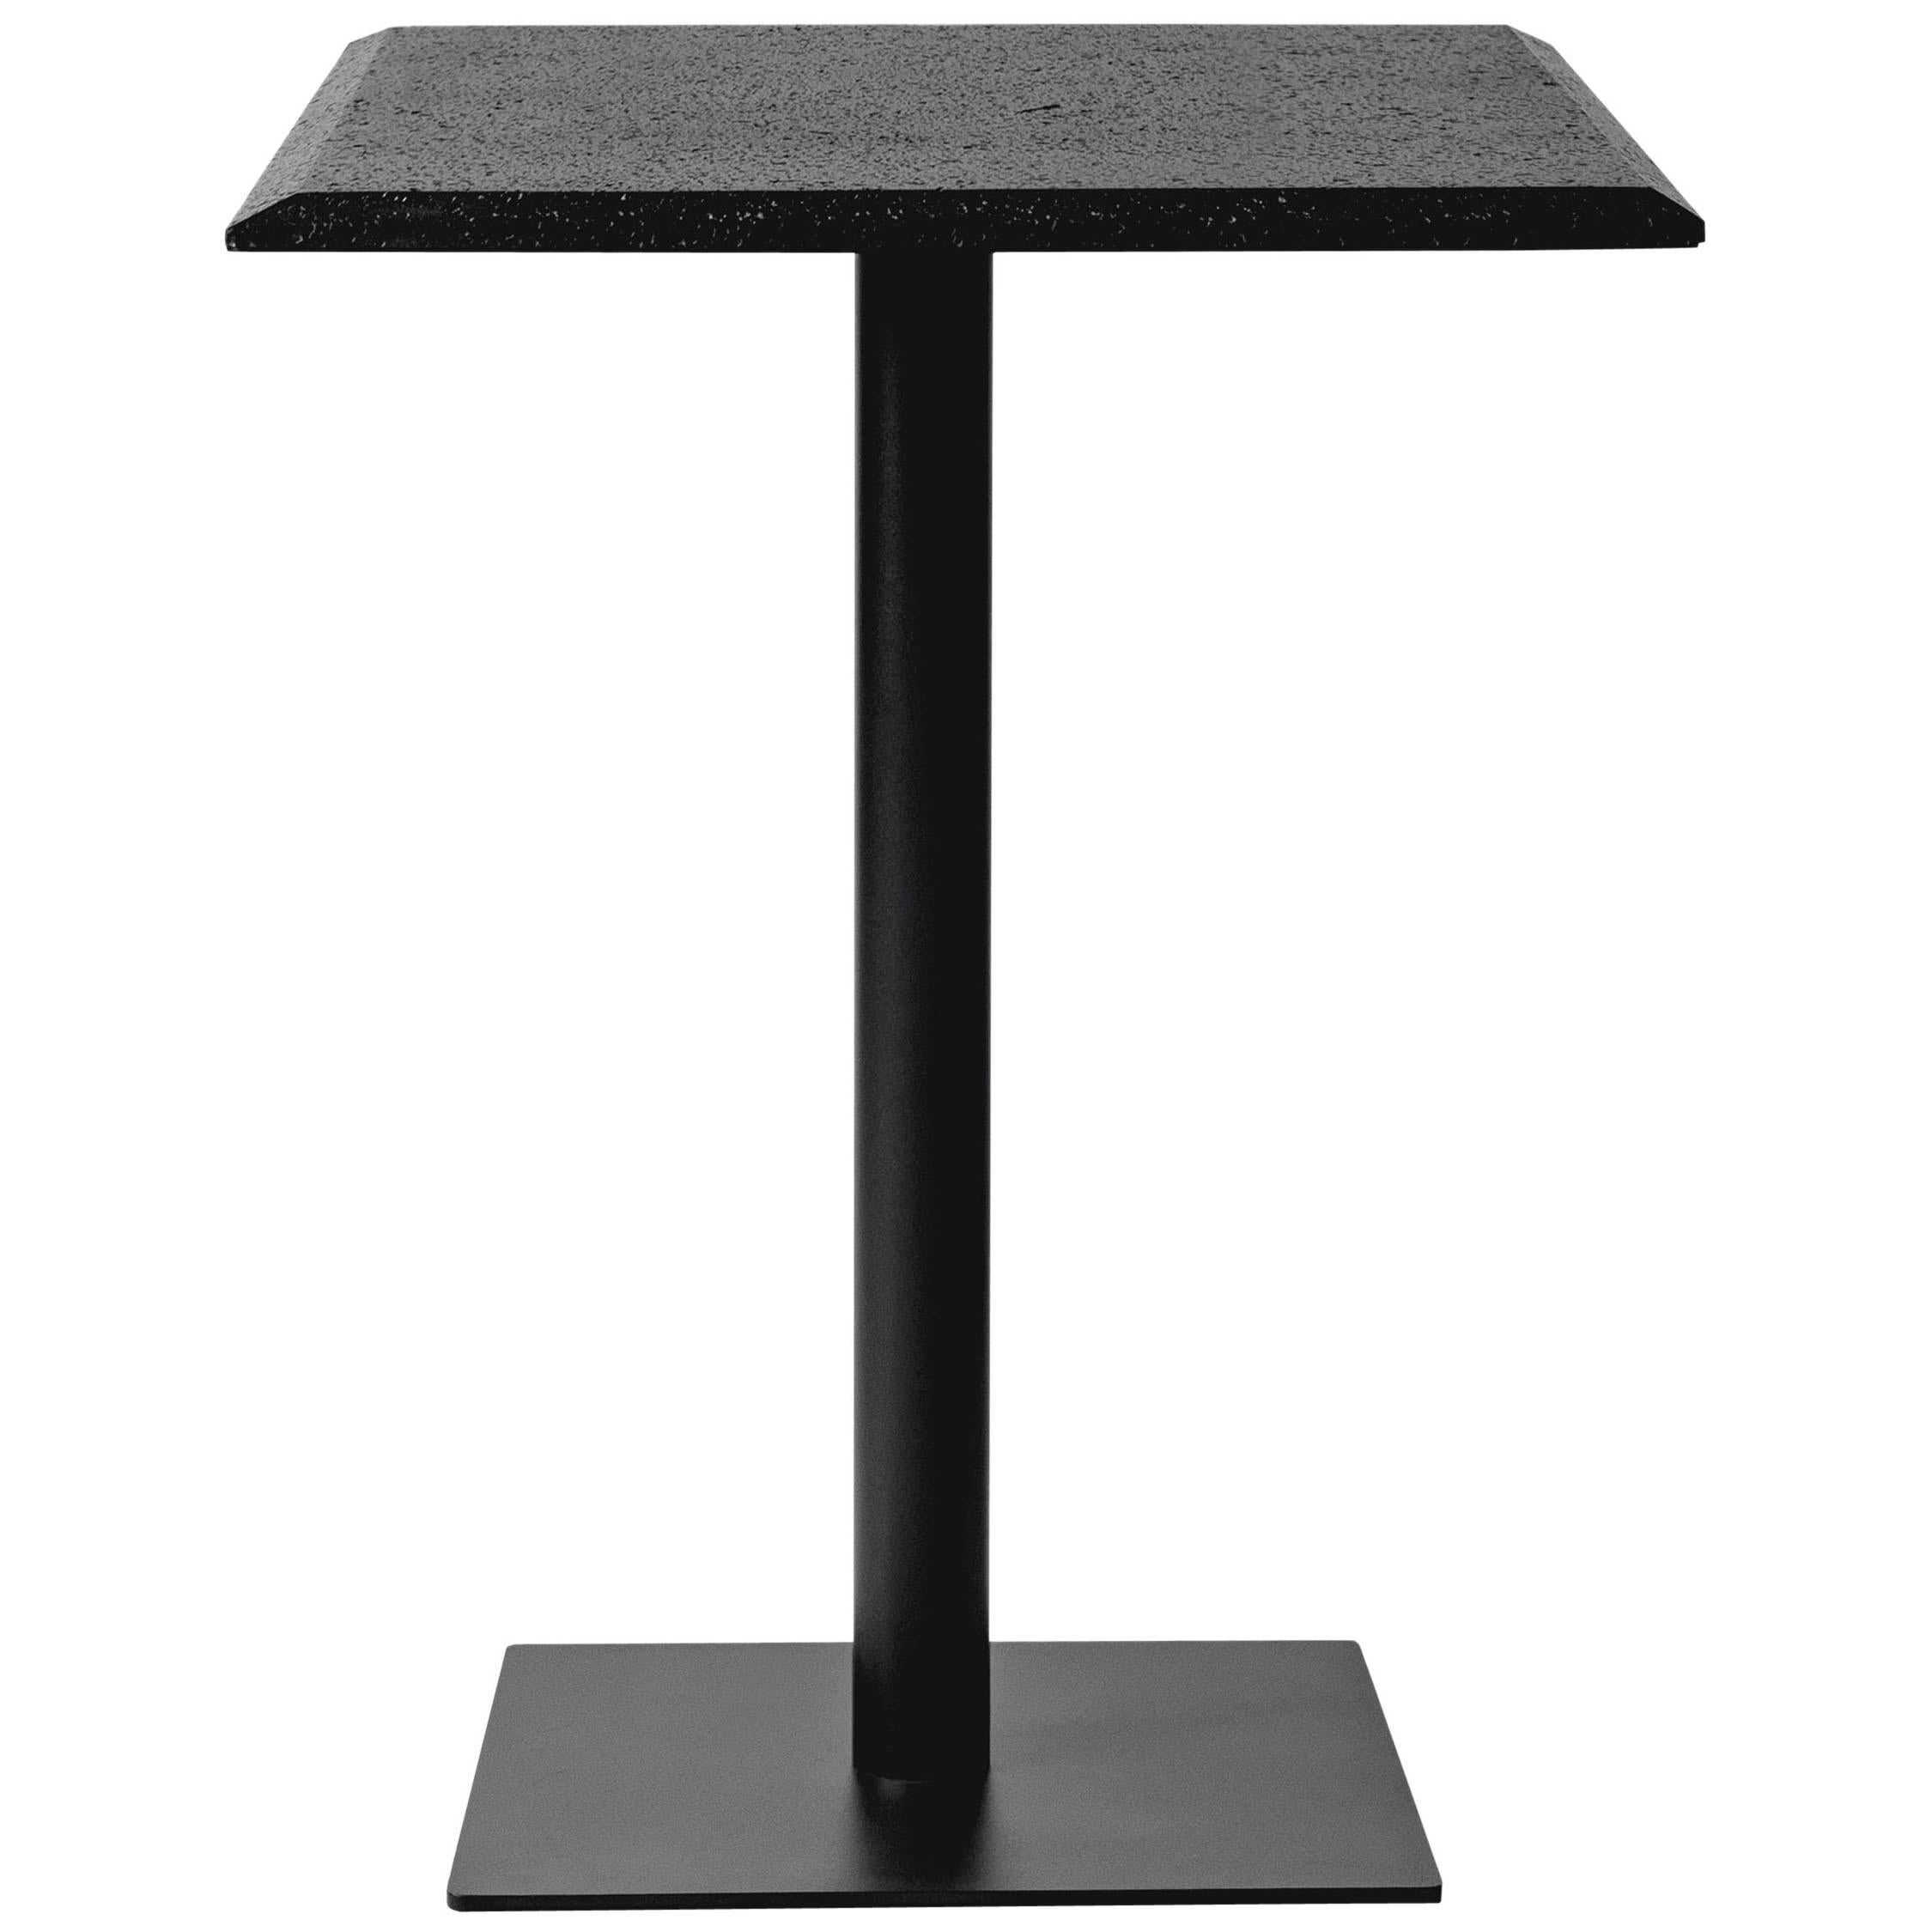 Lava Stone Table, “Right, ” by Buzao